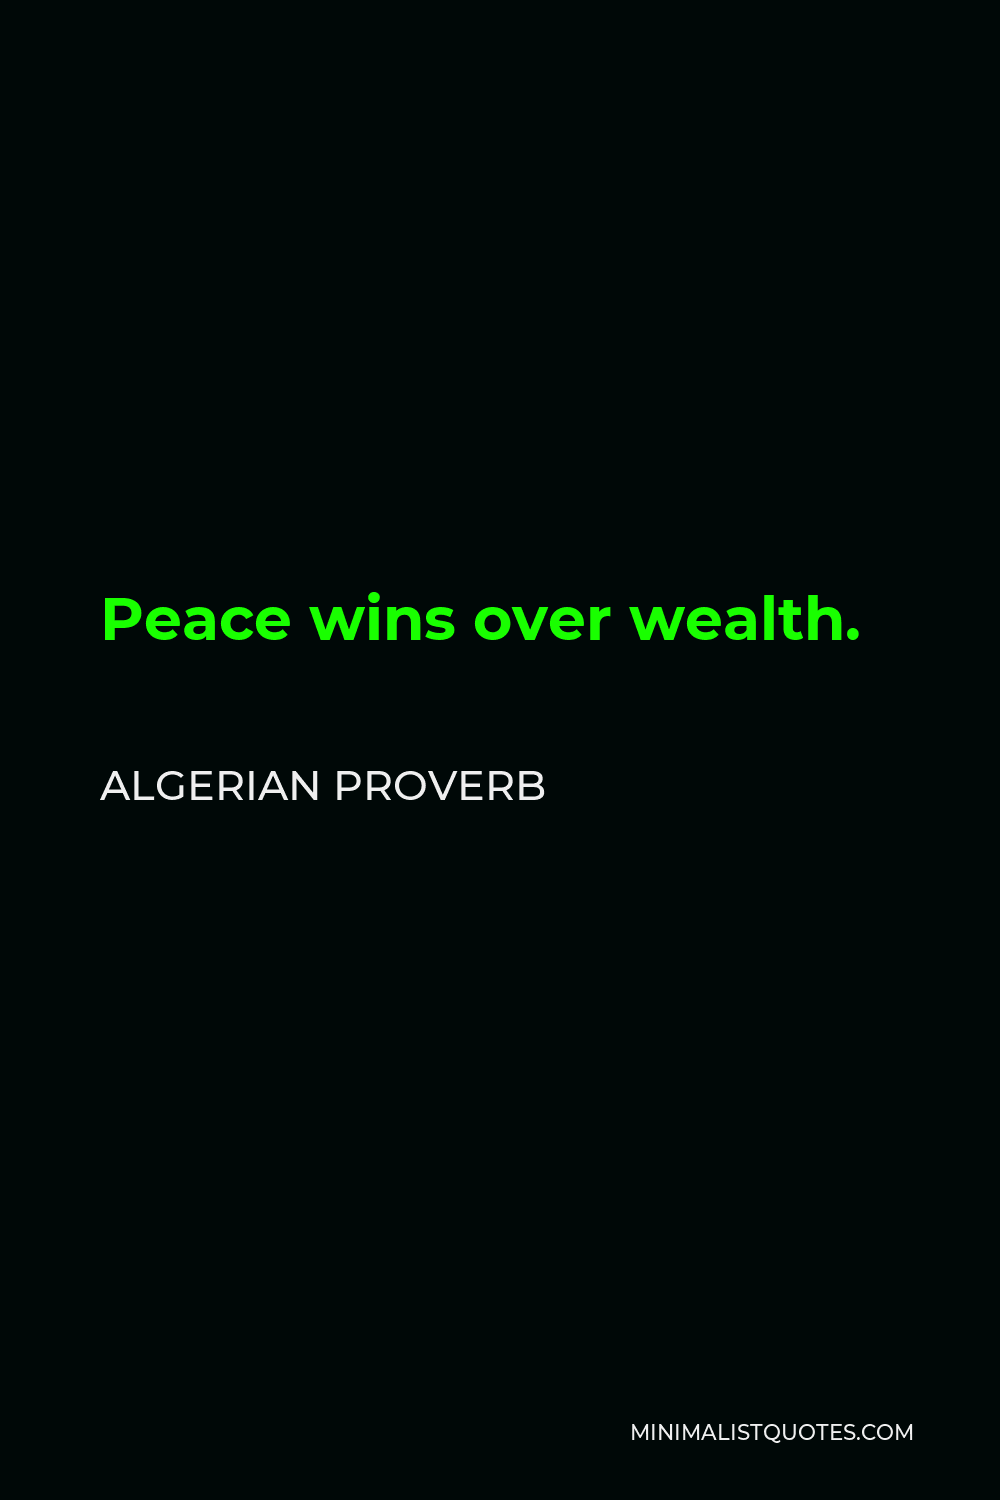 Algerian Proverb Quote - Peace wins over wealth.